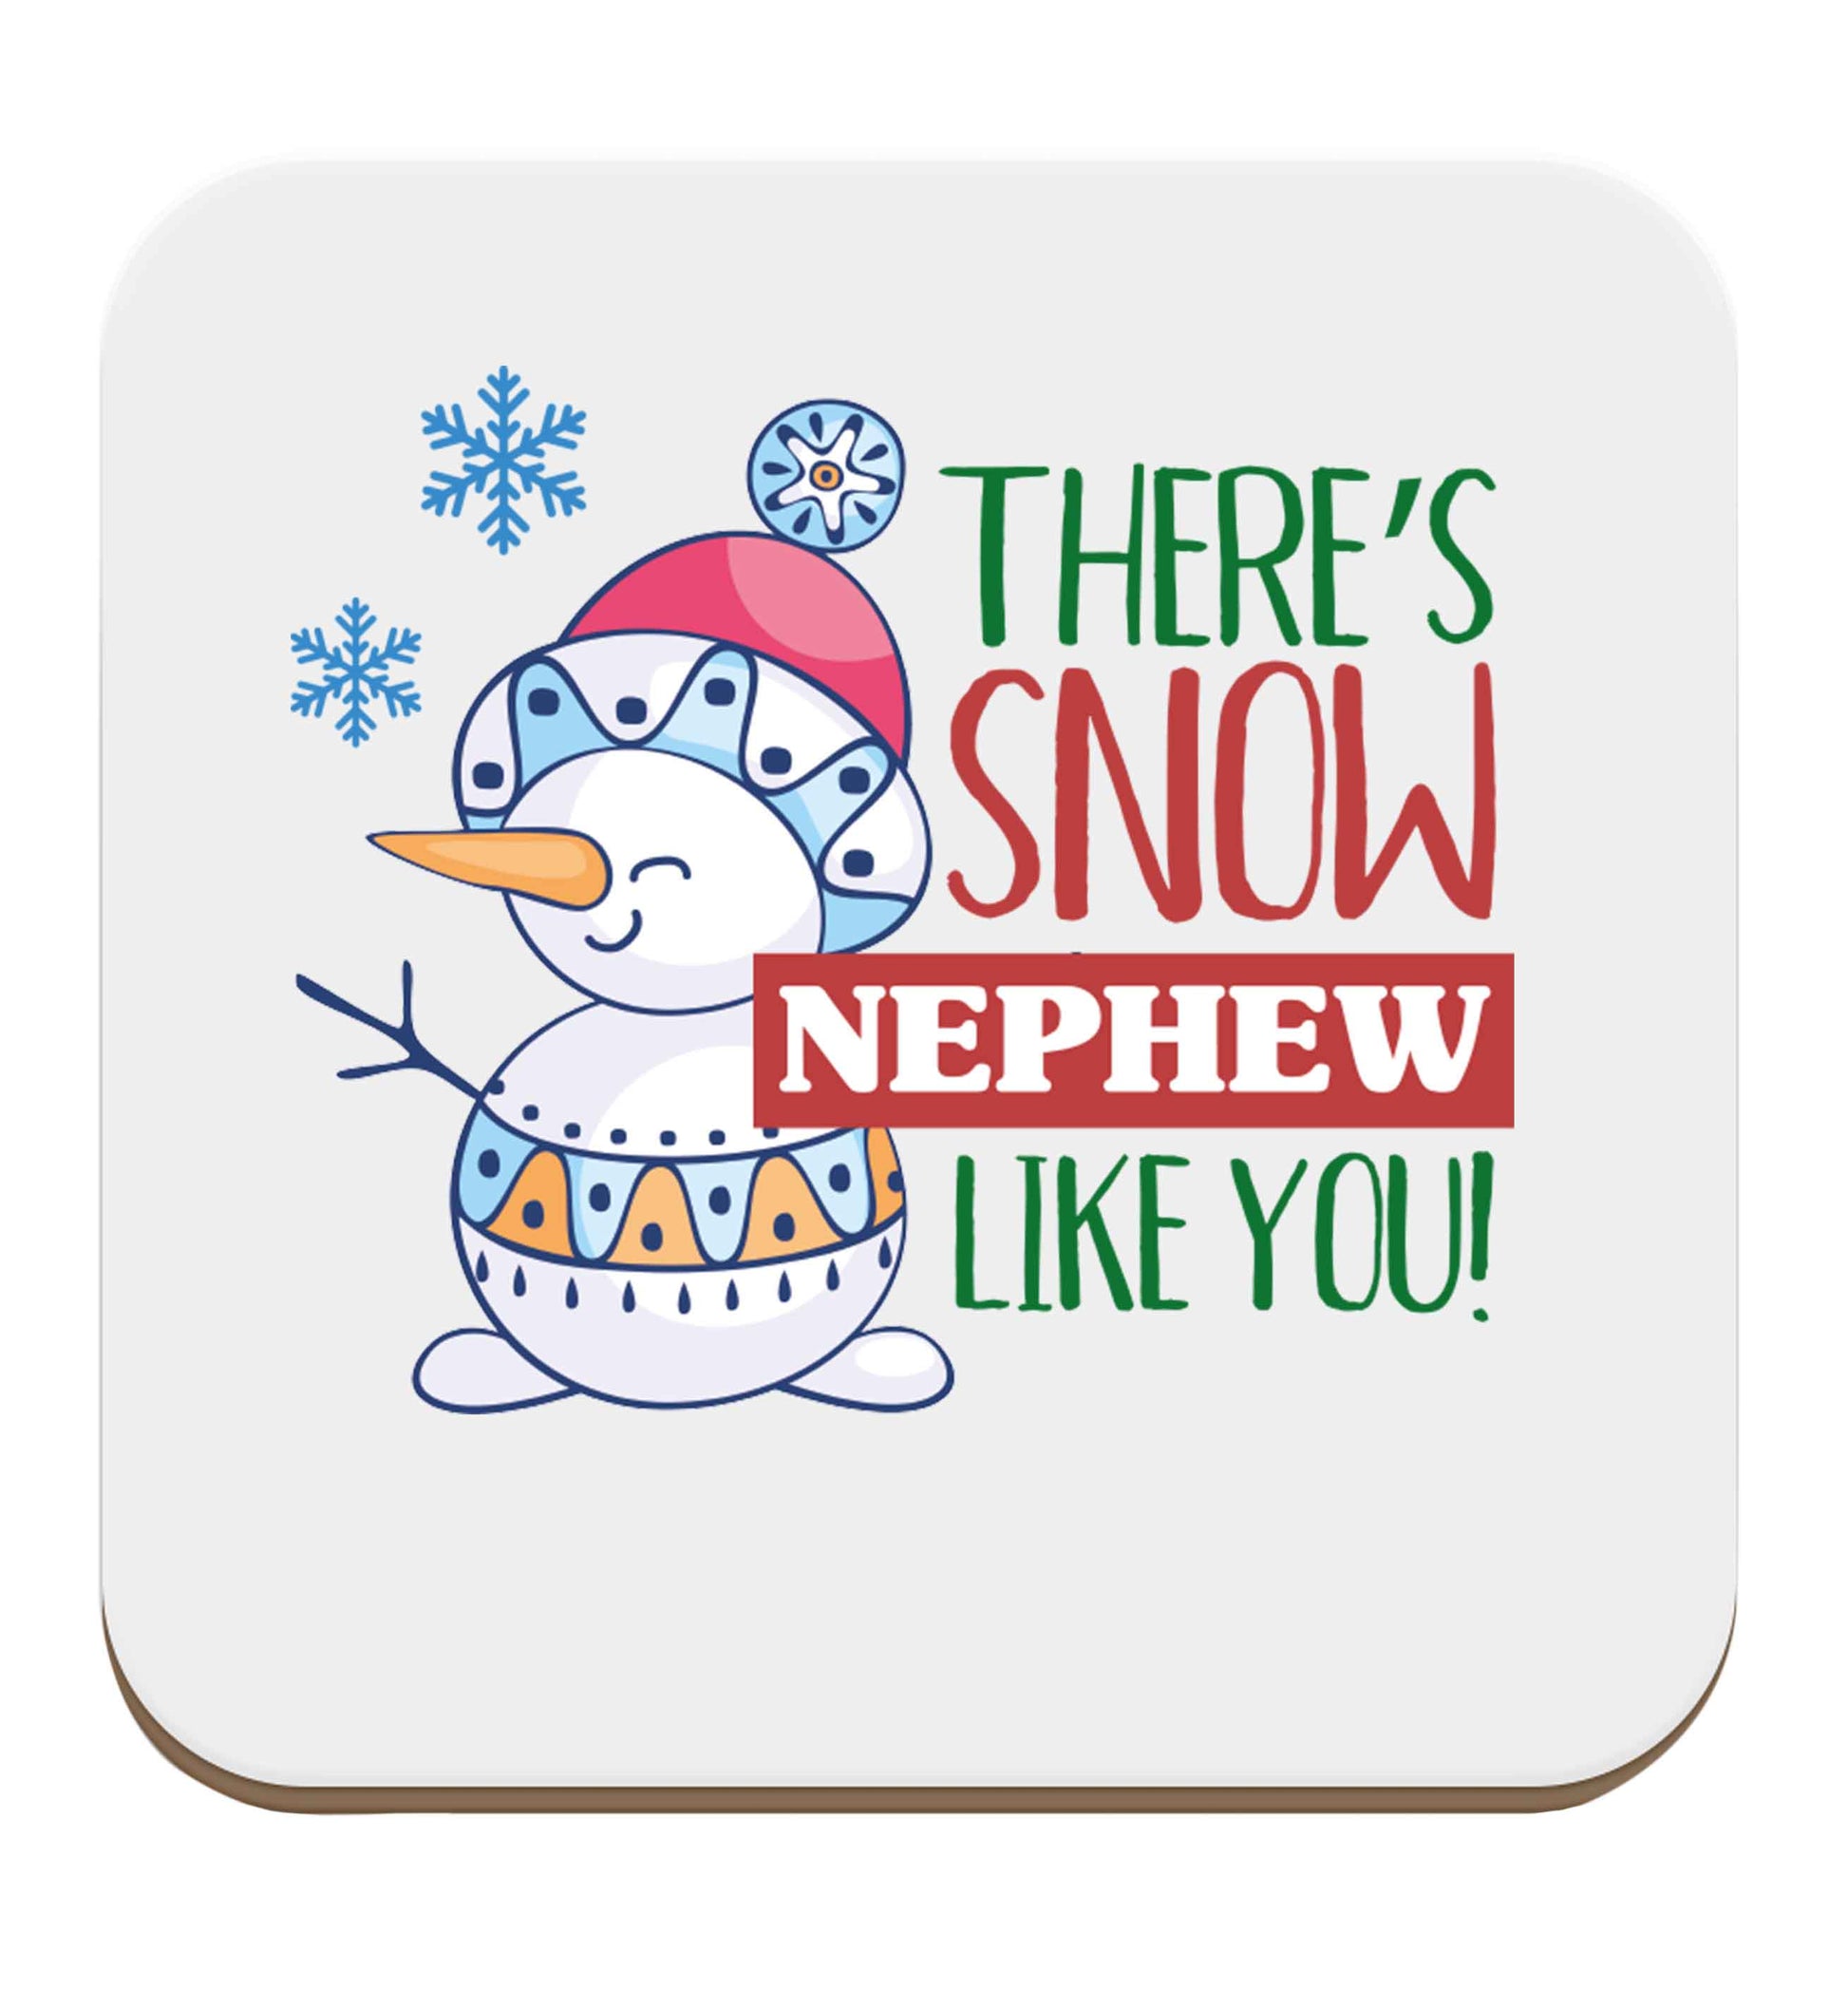 There's snow nephew like you set of four coasters